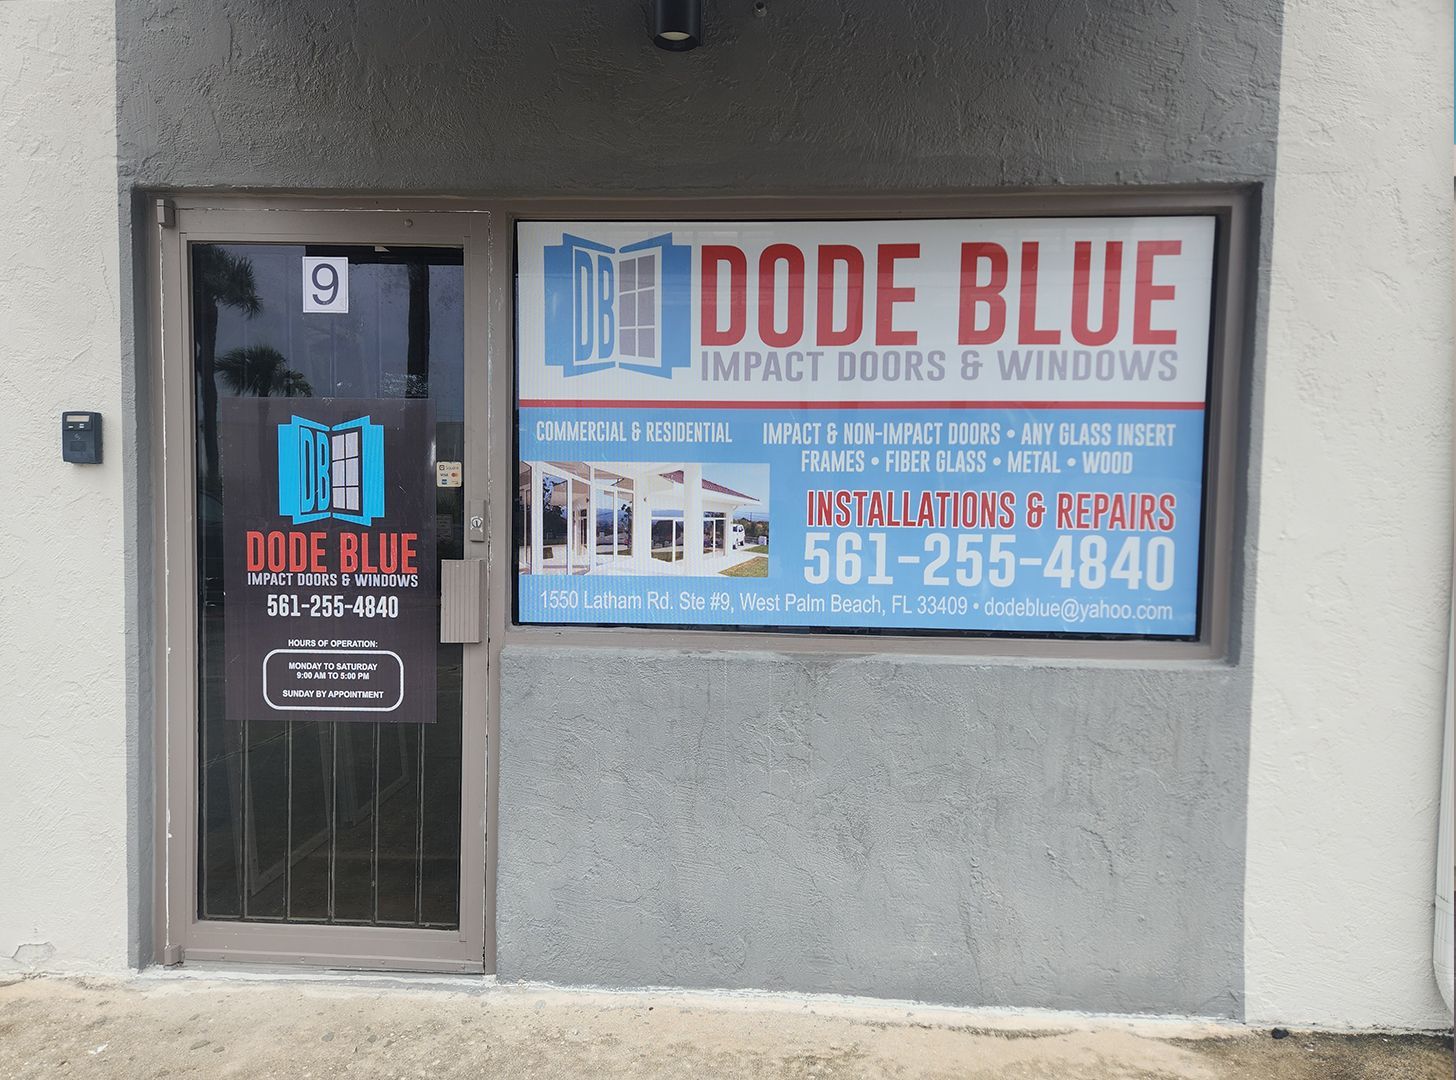 A store front for Dode Blue Impact Doors and Windows